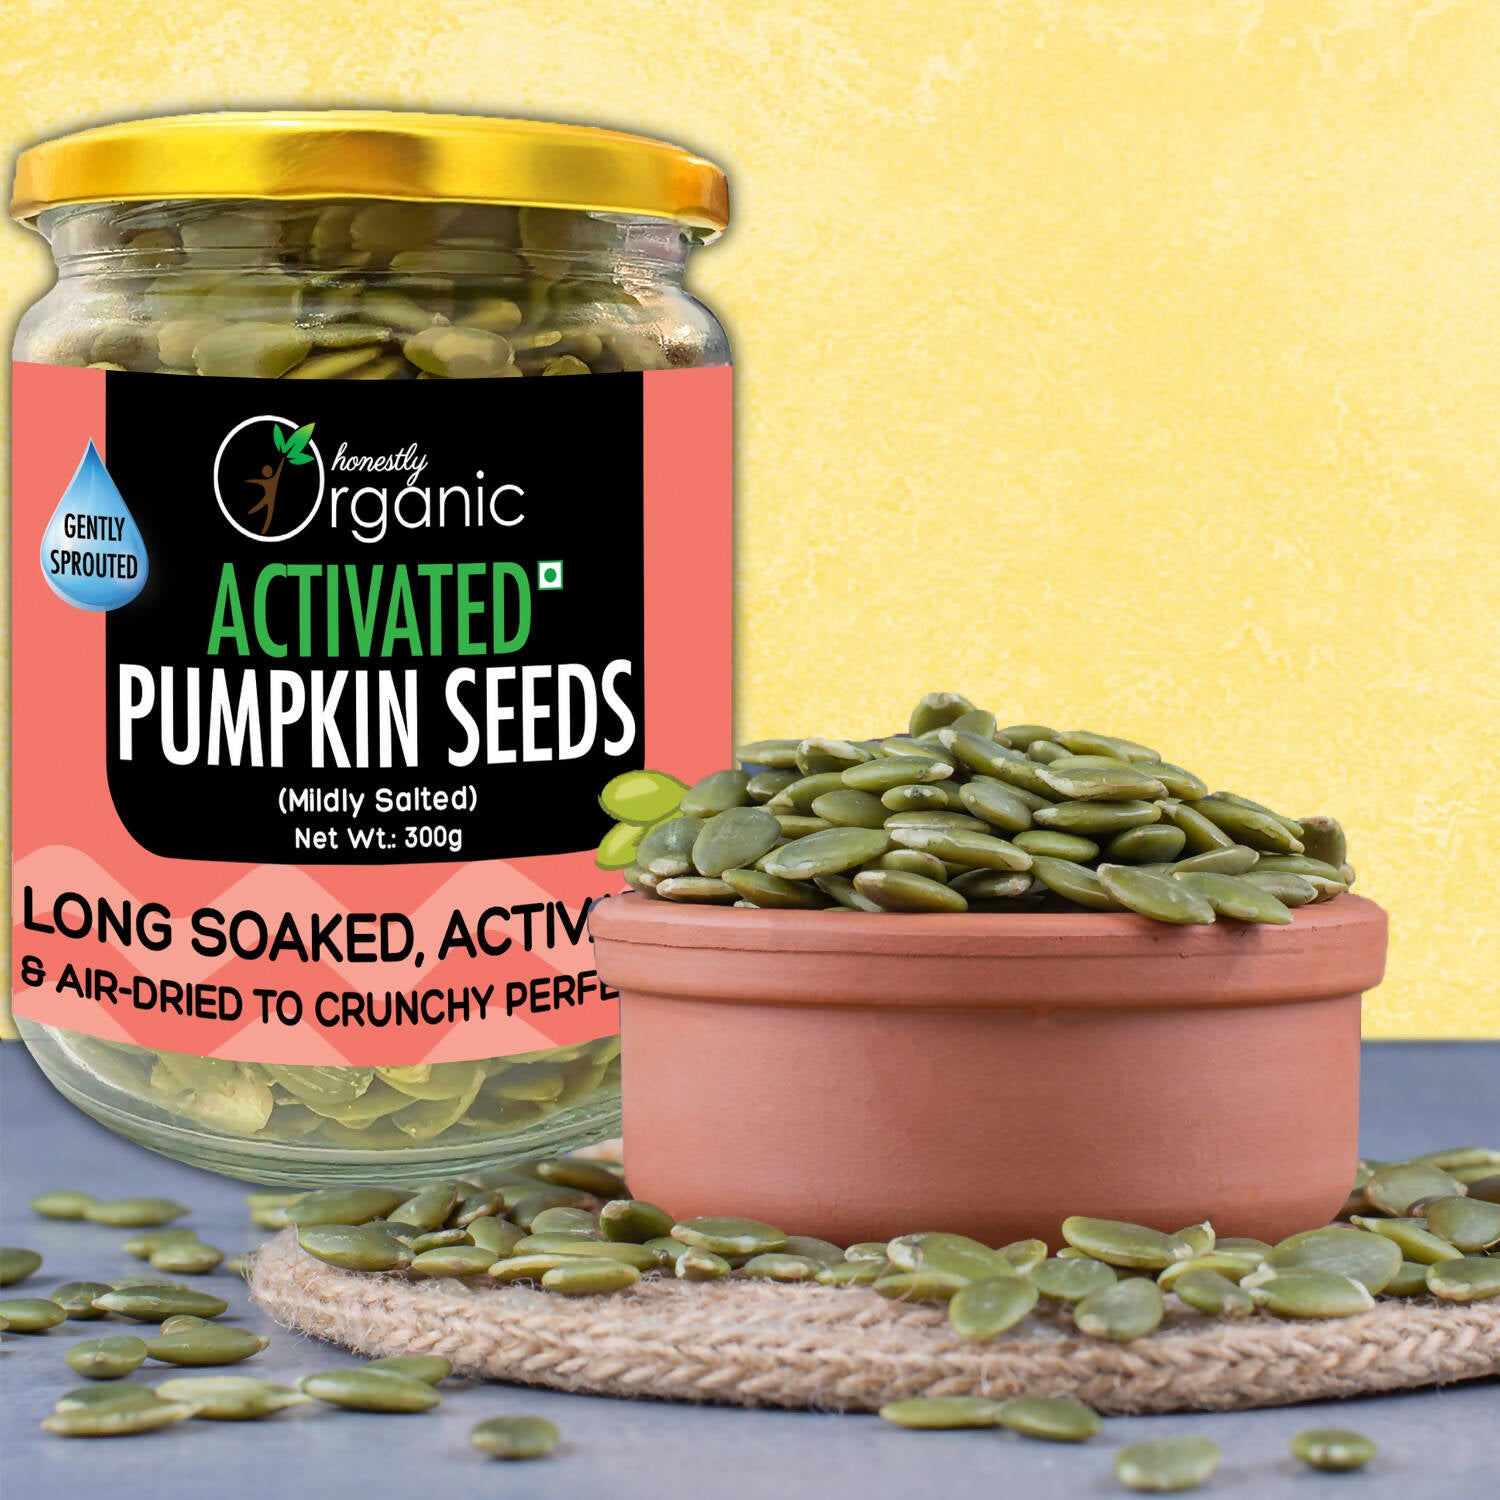 Activated/Sprouted Organic Pumpkin Seeds - Mildly Salted (Organic, Long Soaked & Air Dried to Crunchy Perfection) - 300g